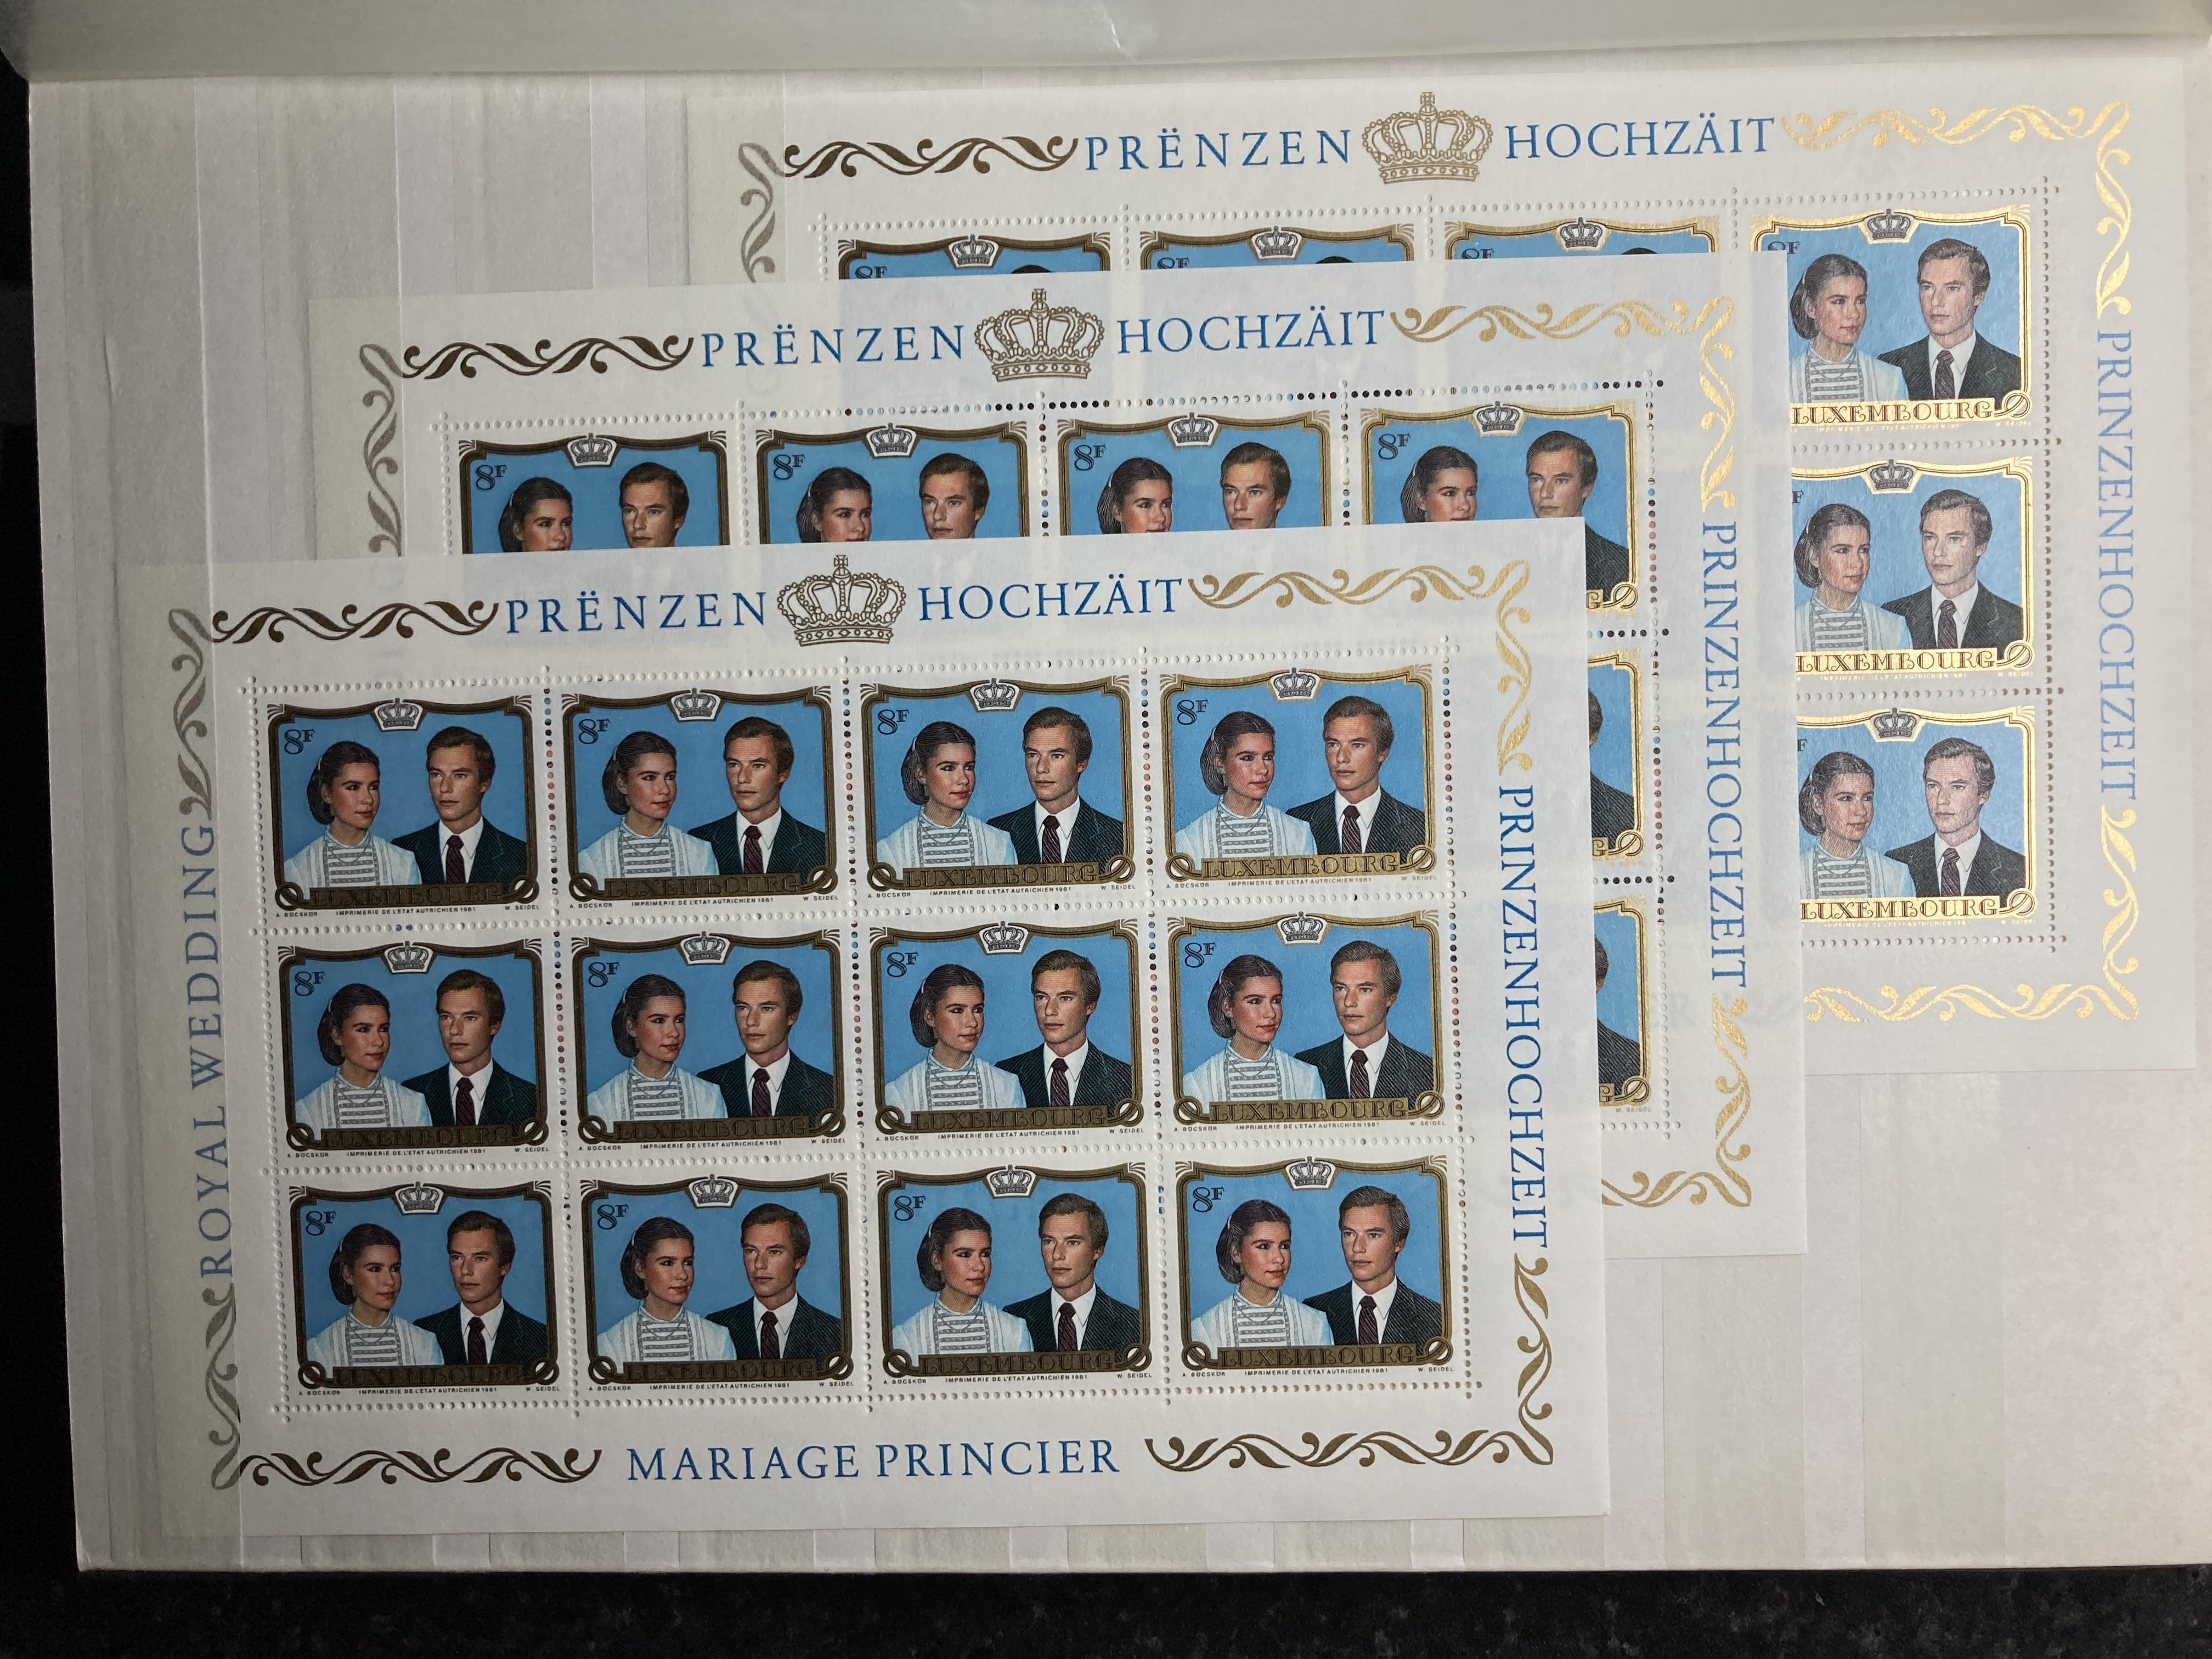 Luxembourg stamp: Collection of mint and used definitives, commemoratives, officials, air & postage - Image 13 of 14